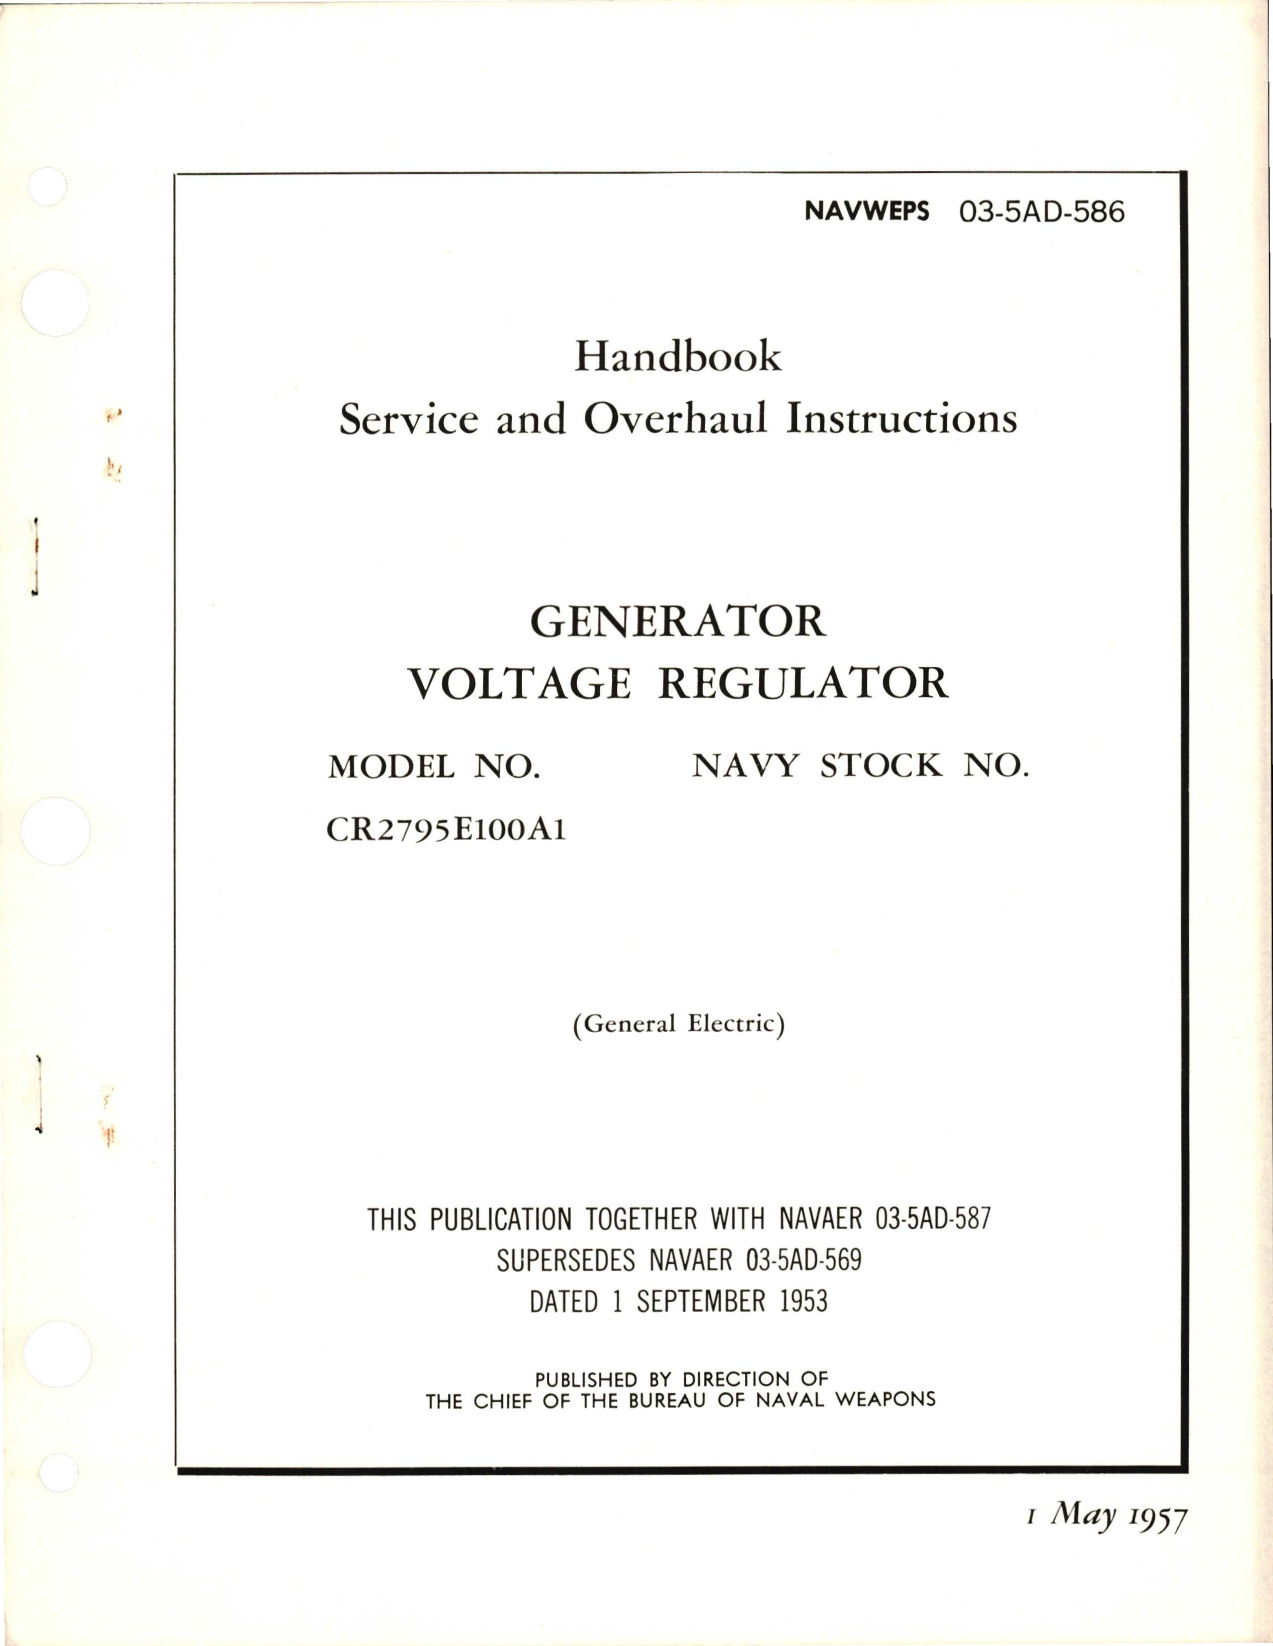 Sample page 1 from AirCorps Library document: Service and Overhaul Instructions for Generator Voltage Regulator - Model CR2795E100A1